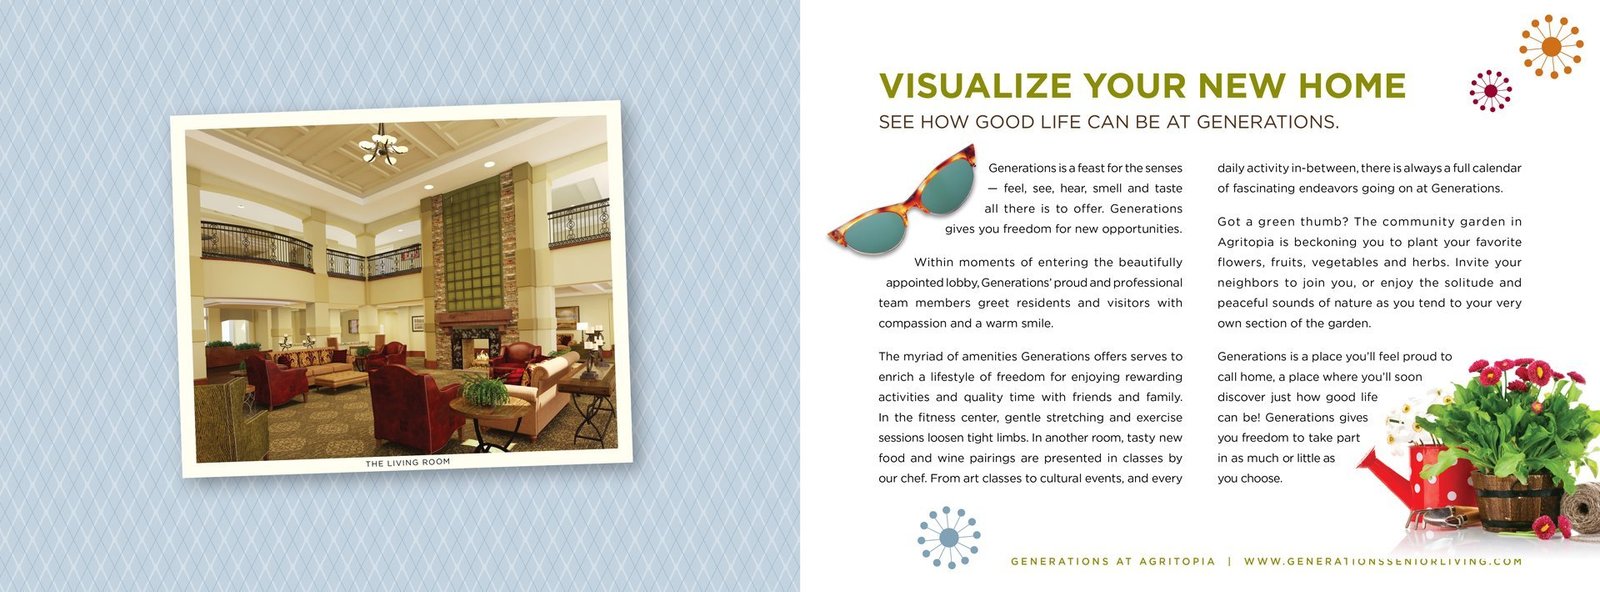 Visualize Your New Home